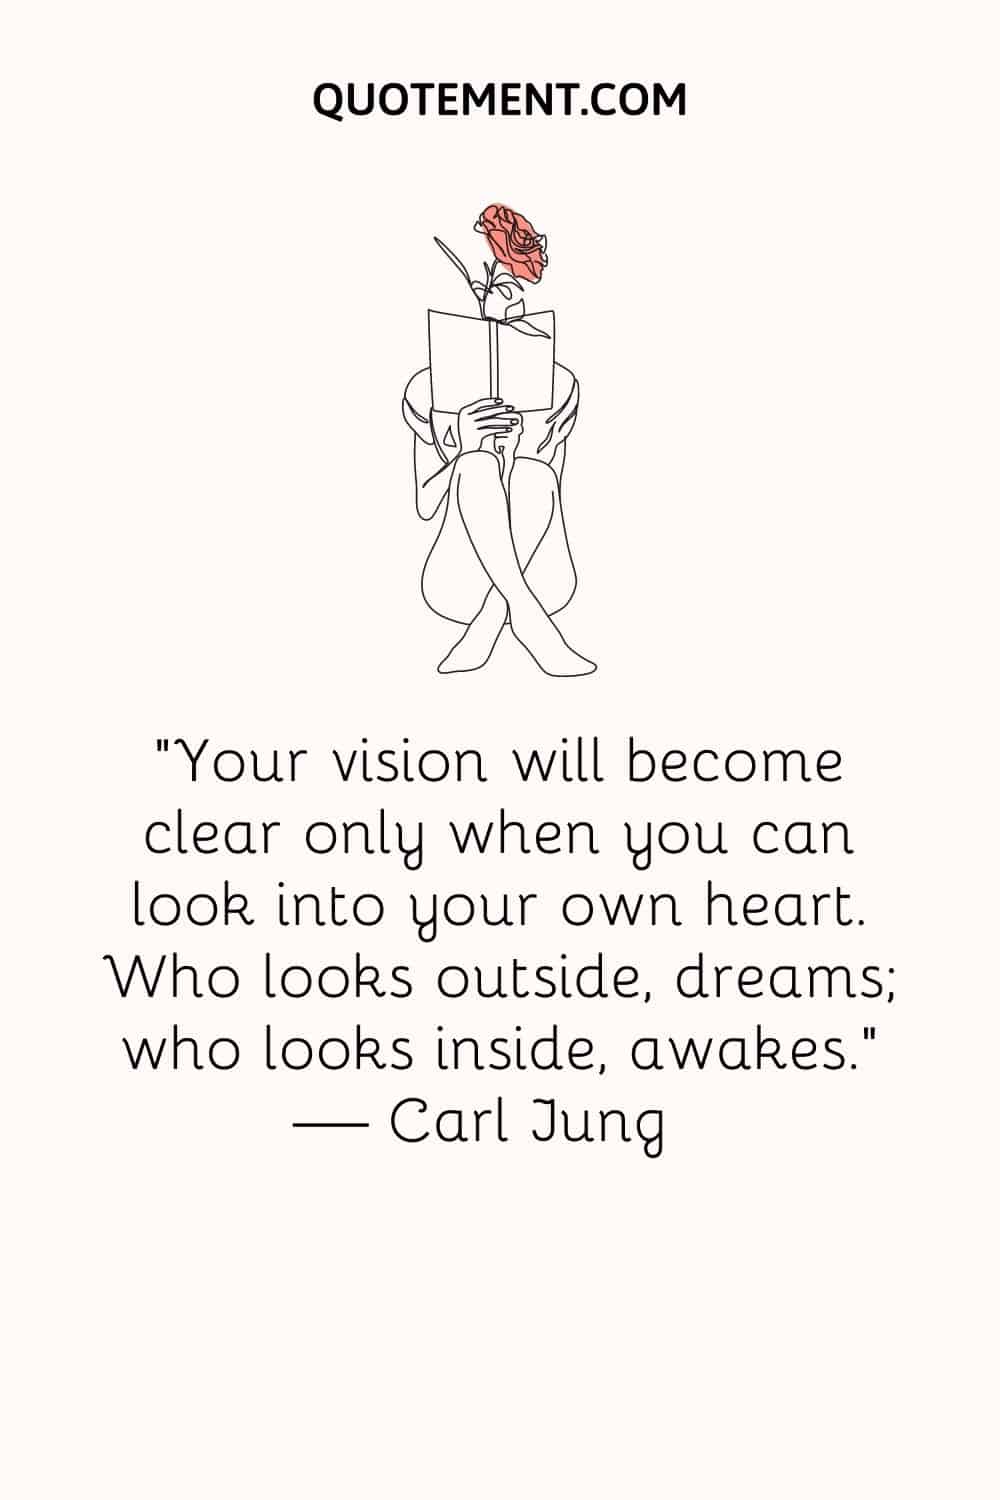 Your vision will become clear only when you can look into your own heart